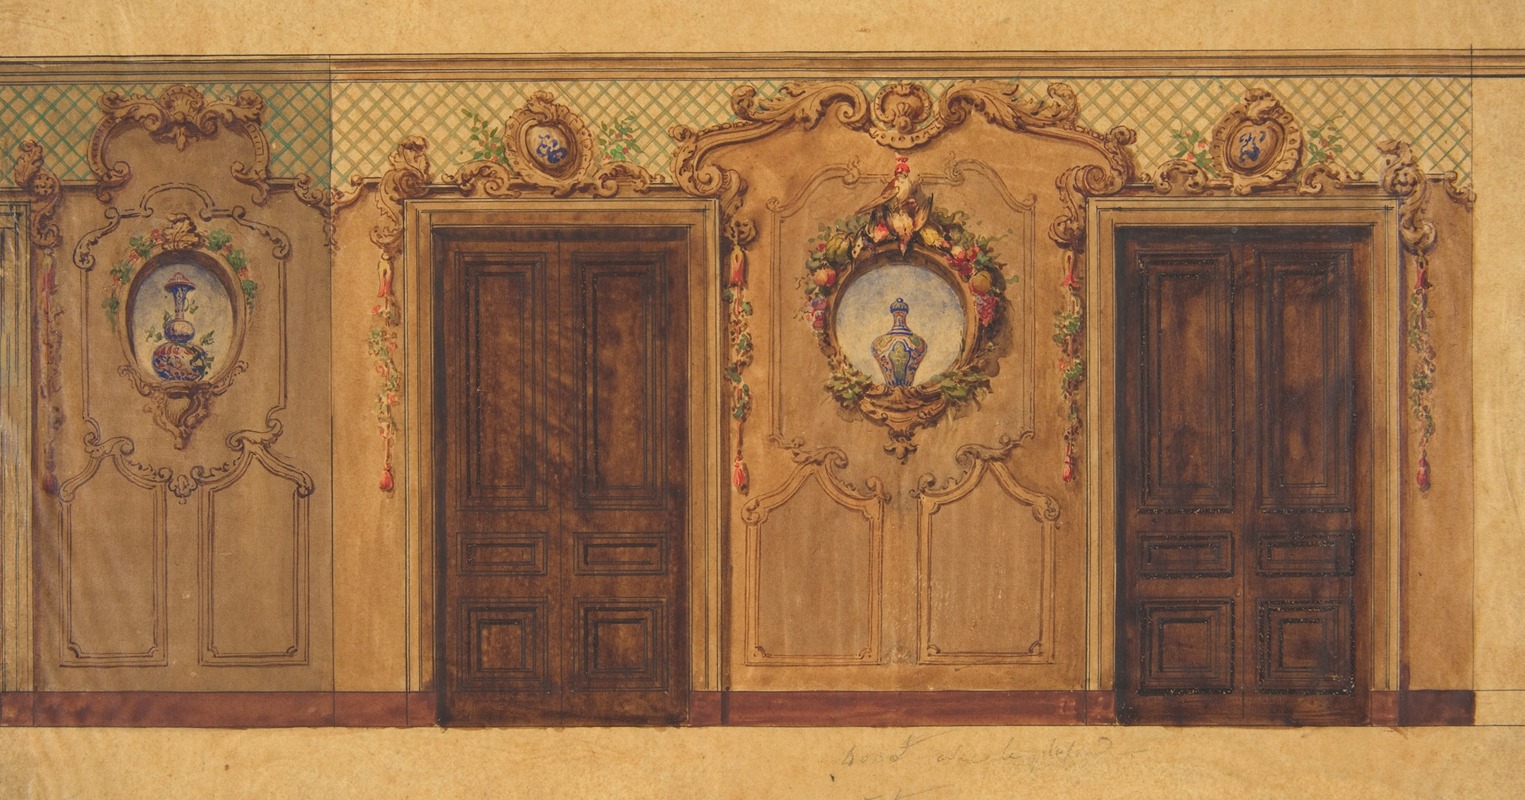 Jules-Edmond-Charles Lachaise - Design for a room with double doors decorated with garlands of fruit and flowers, scrolls, and lattice work